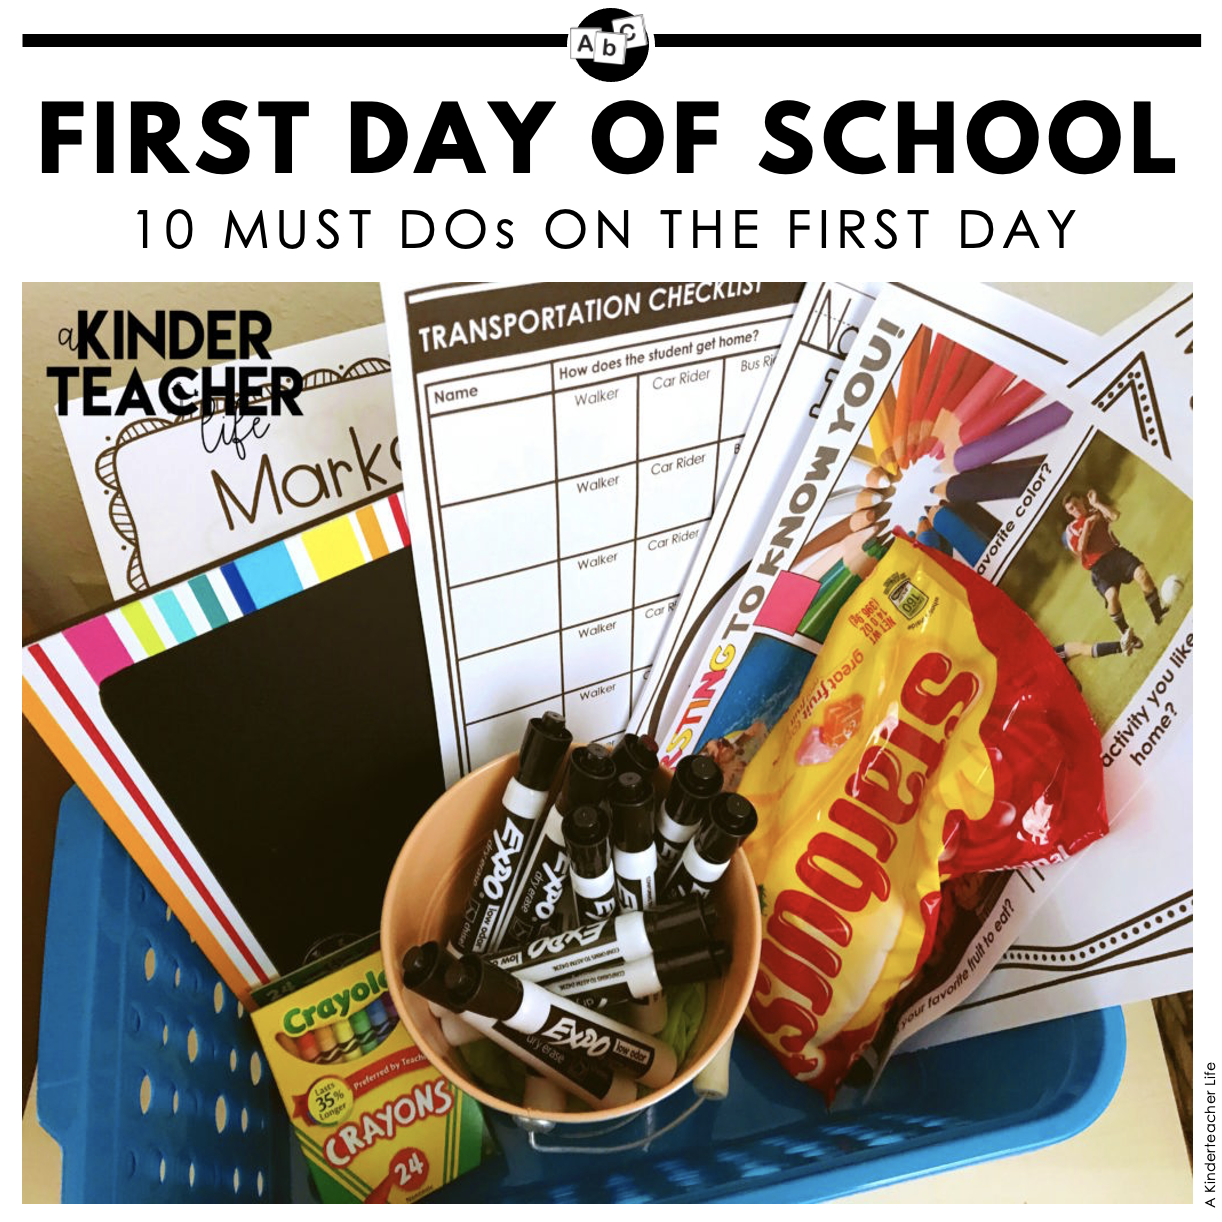 10 Must-Dos on the First Day of School